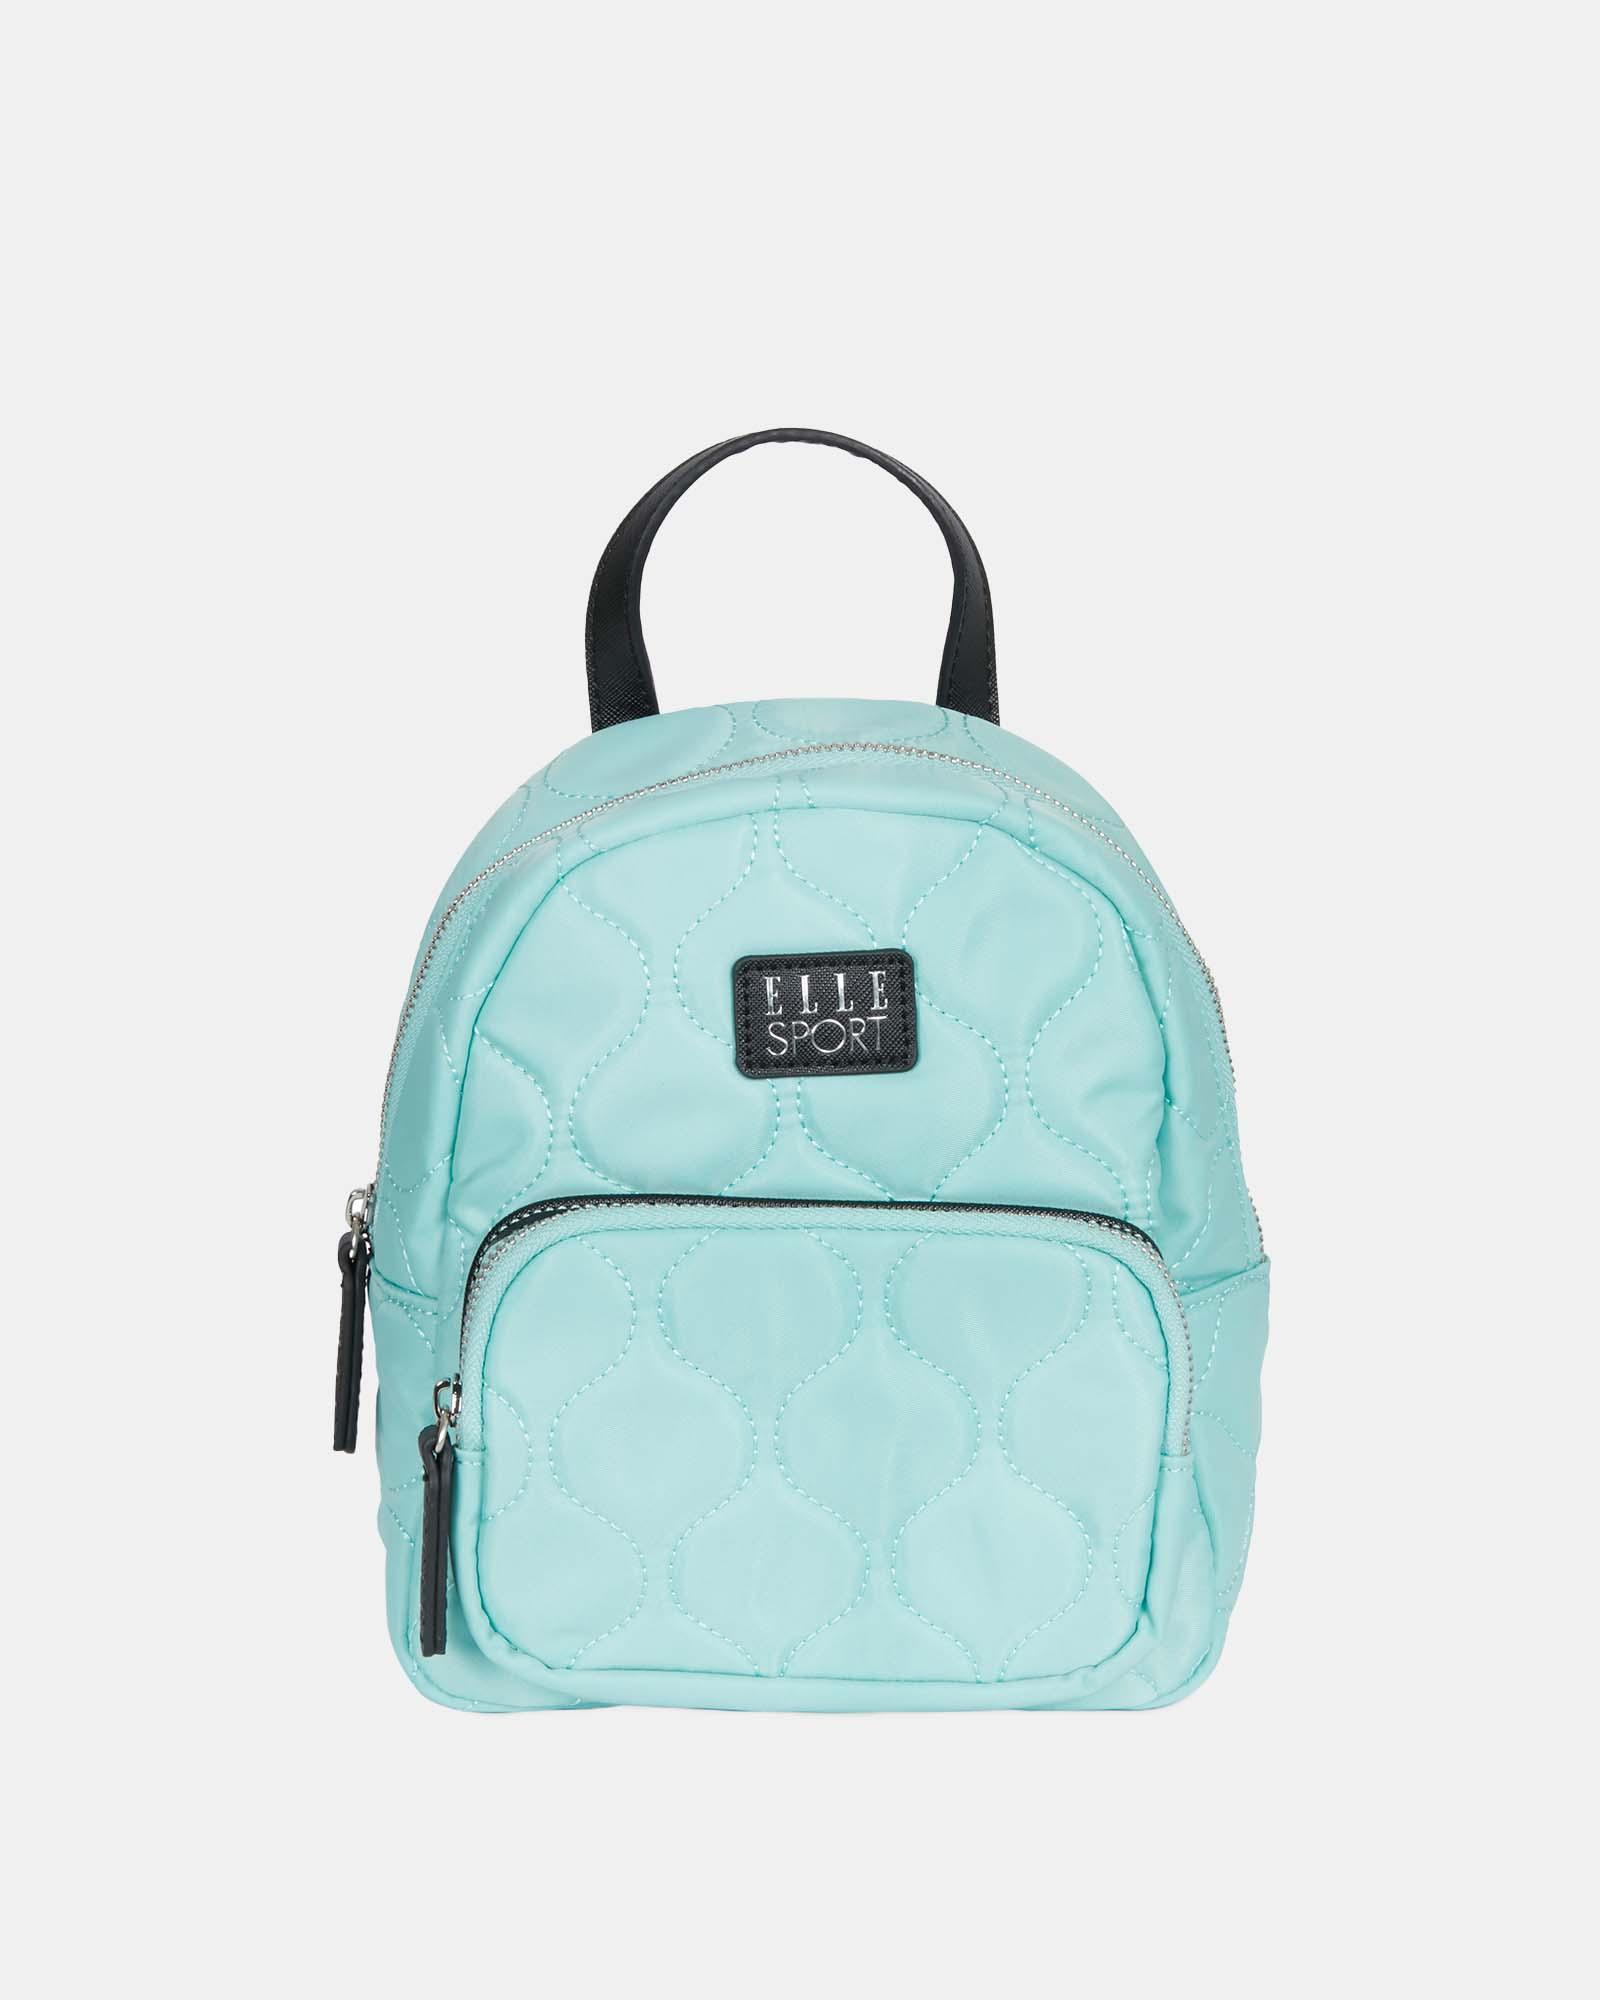 Elle Sport Mini Quilted Backpack in Blue | Lyst Australia